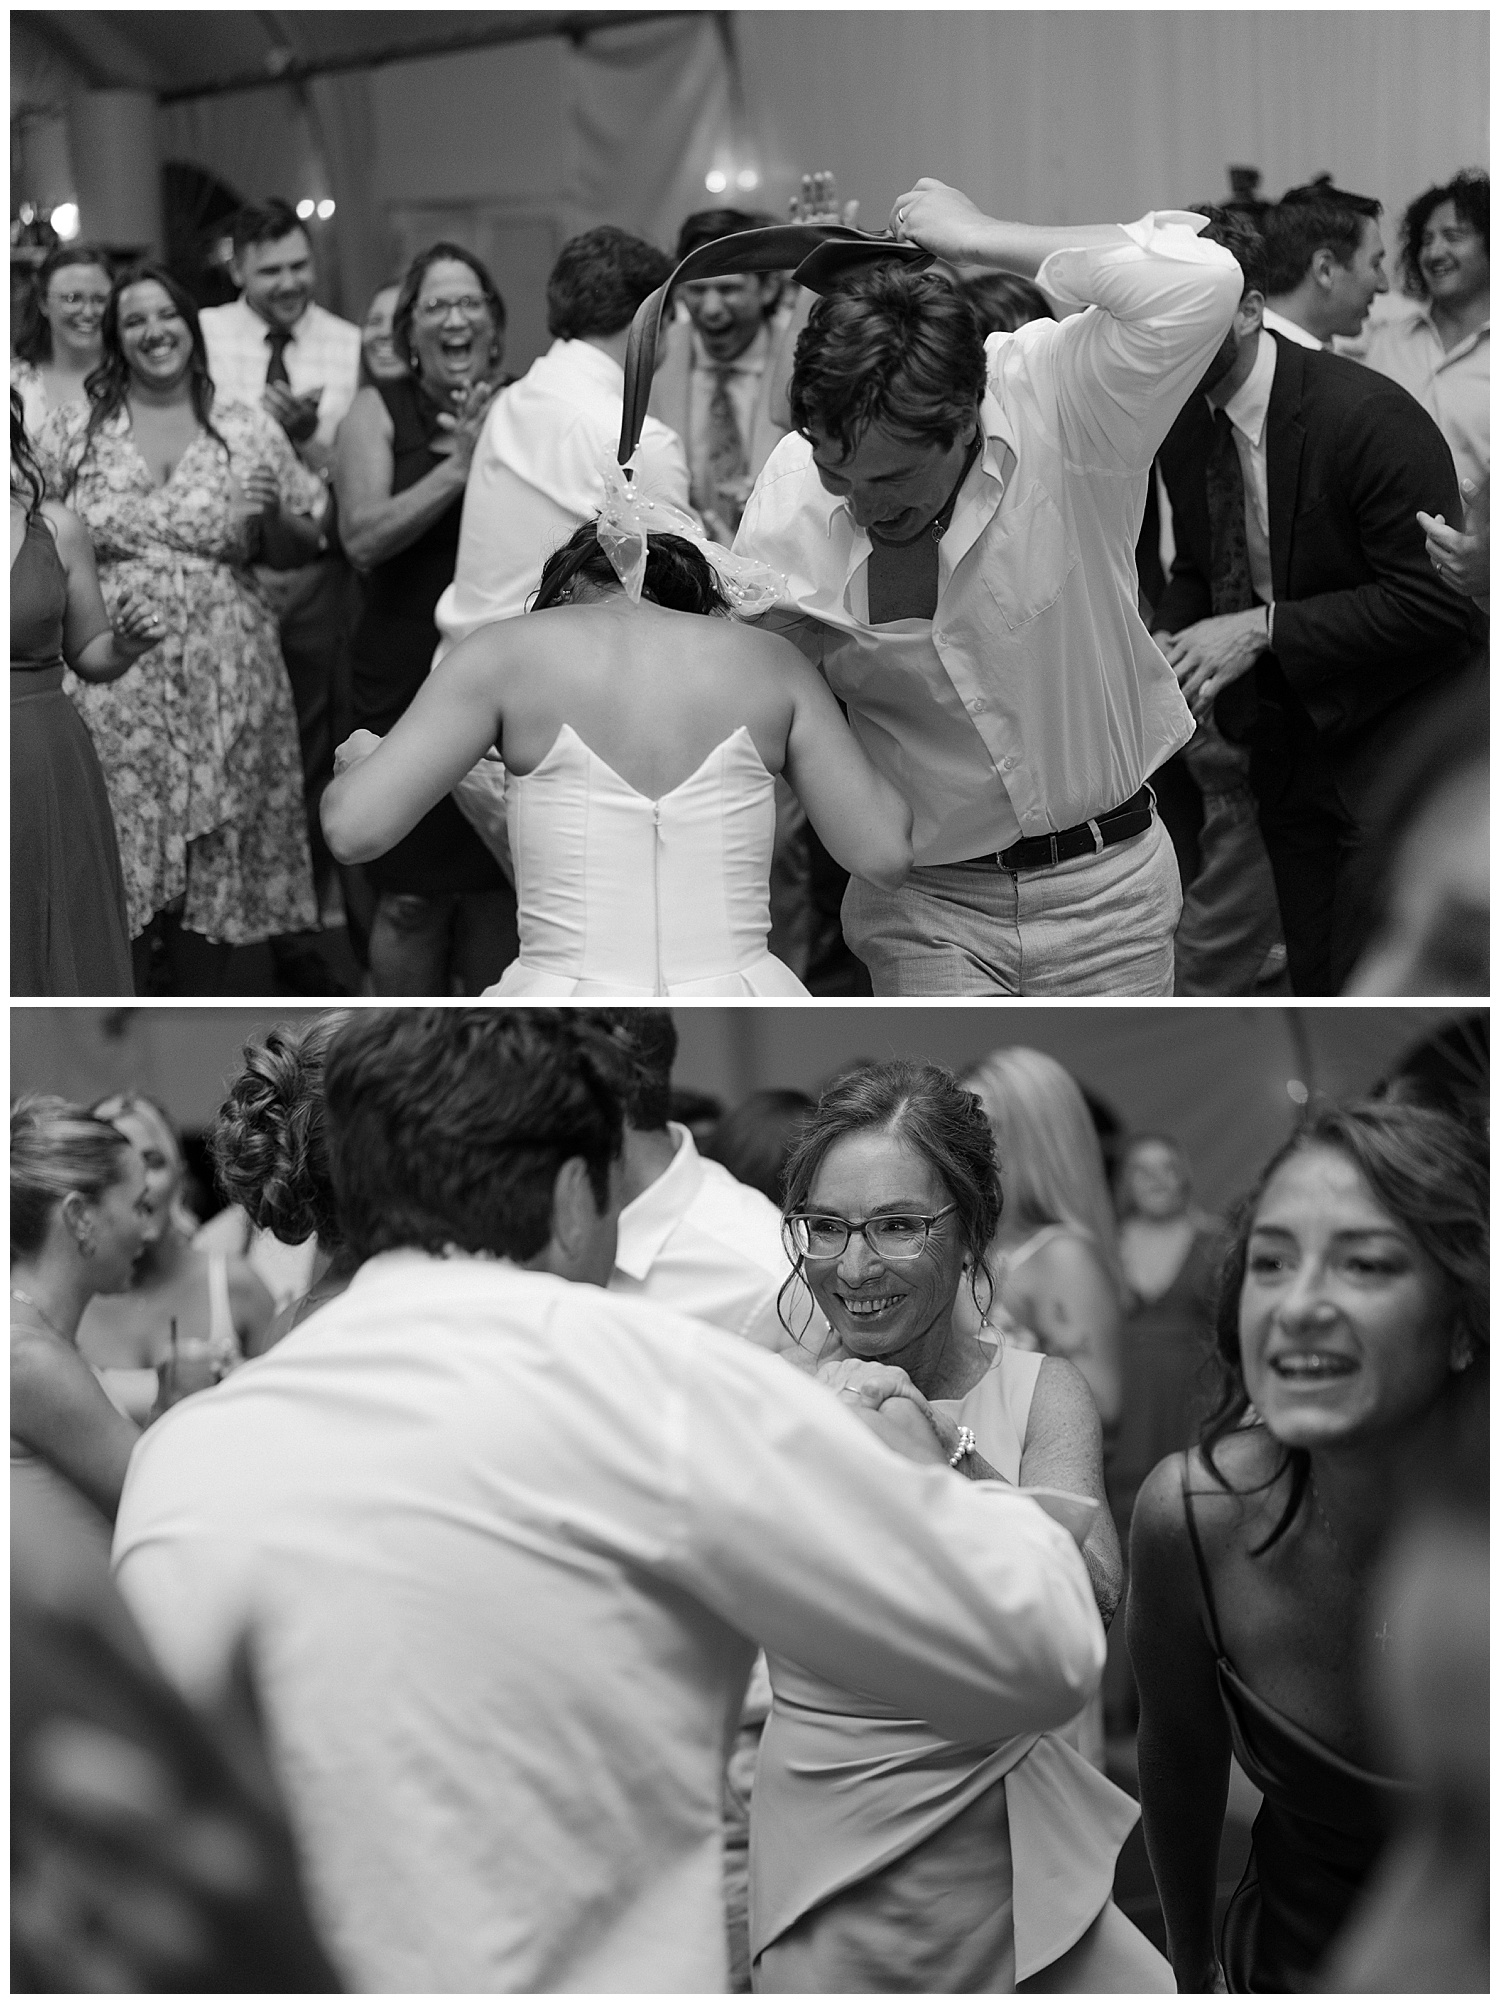 Candid dancing photos from wedding reception